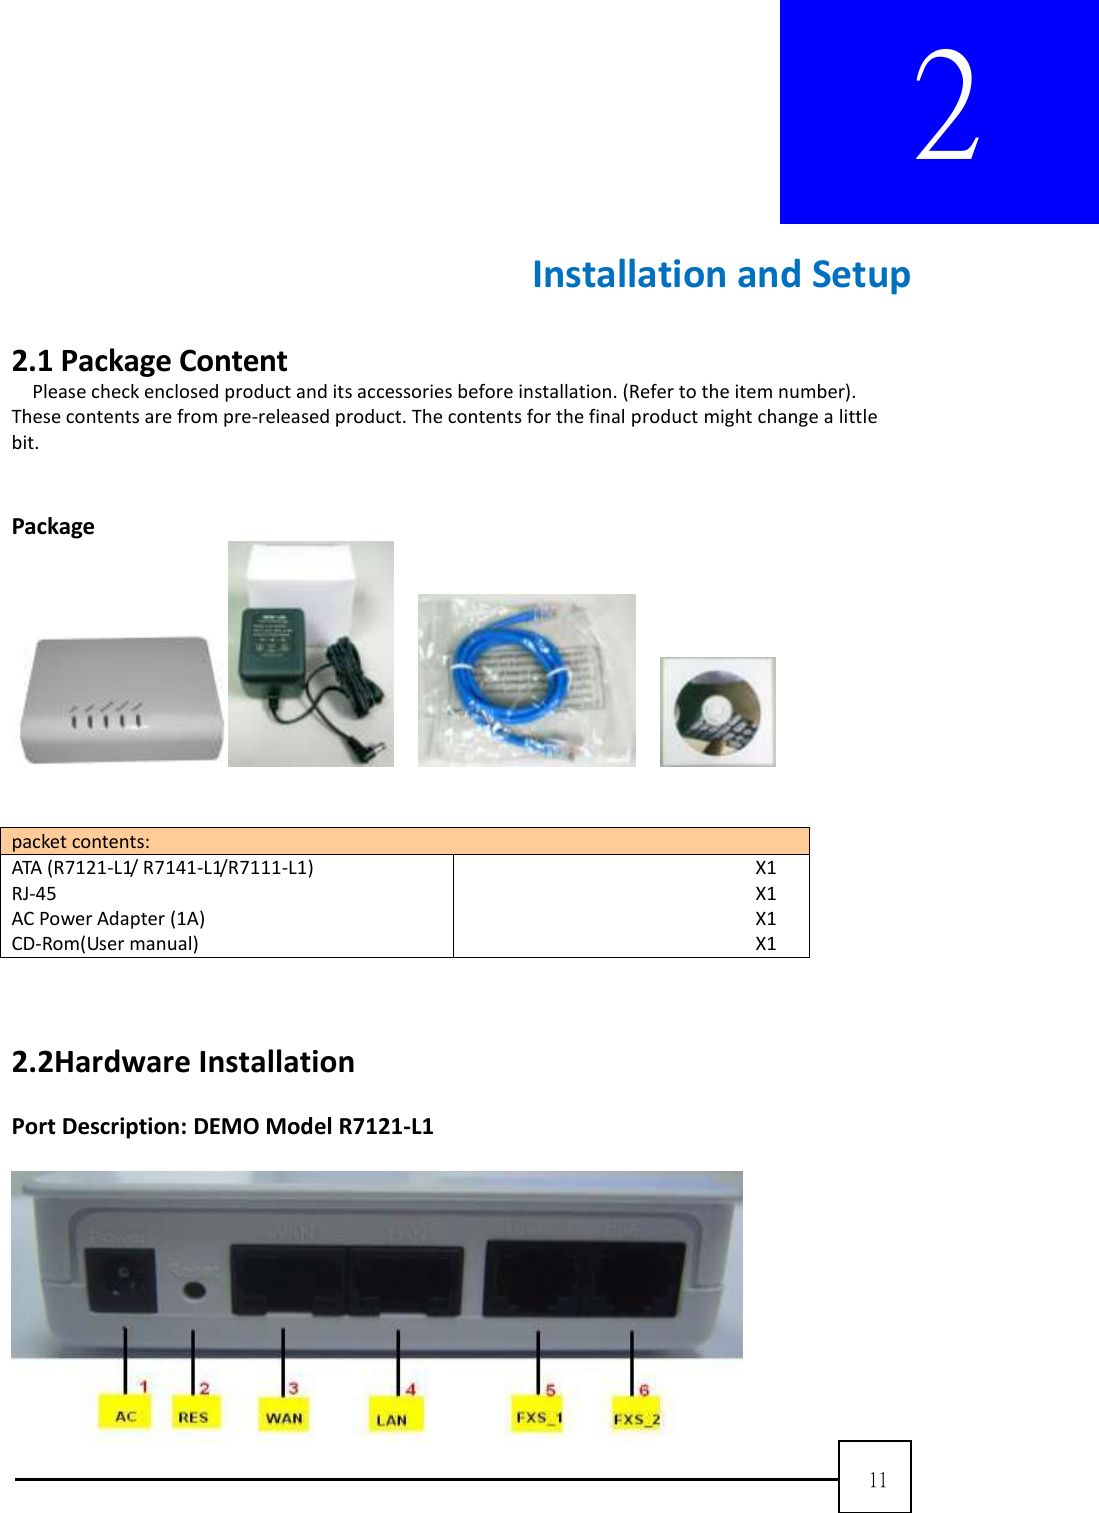  11  2        Installation and Setup  2.1 Package Content   Please check enclosed product and its accessories before installation. (Refer to the item number). These contents are from pre-released product. The contents for the final product might change a little bit.     Package            packet contents: ATA (R7121-L1/ R7141-L1/R7111-L1)   RJ-45 AC Power Adapter (1A) CD-Rom(User manual) X1   X1   X1   X1      2.2Hardware Installation  Port Description: DEMO Model R7121-L1   